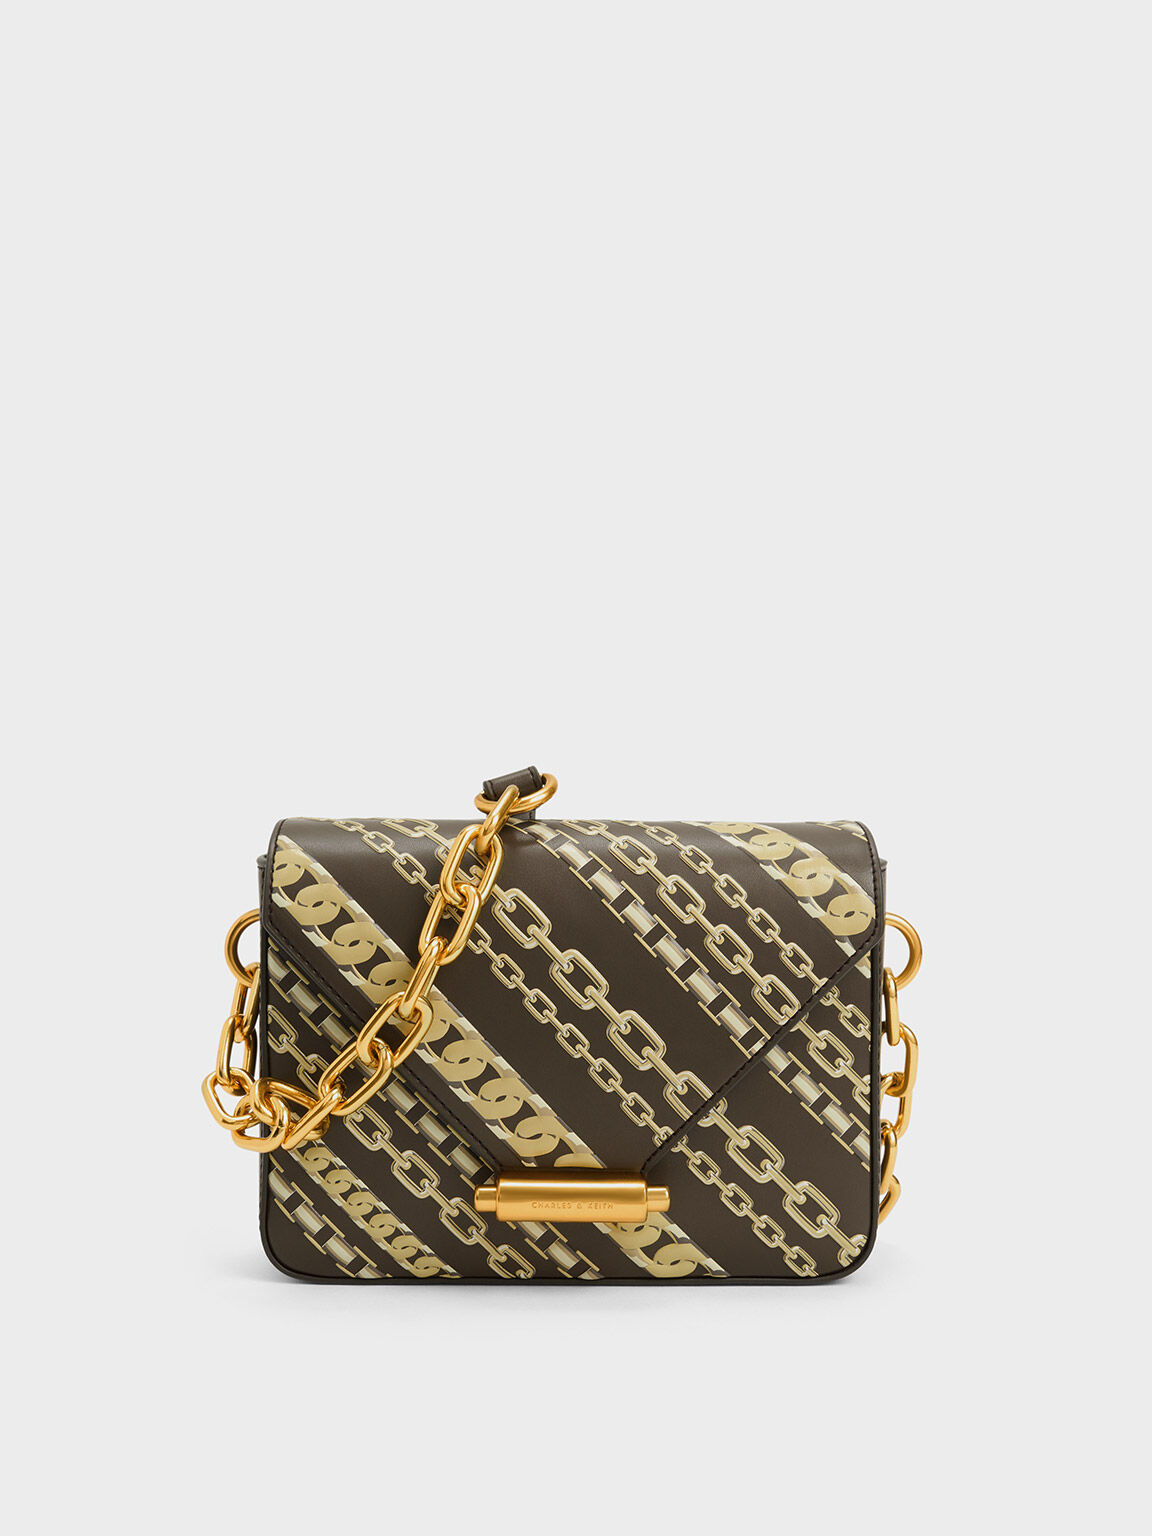 Buy LOUIS VUITTON Messenger Bags & Crossbody Bags online - 1 products